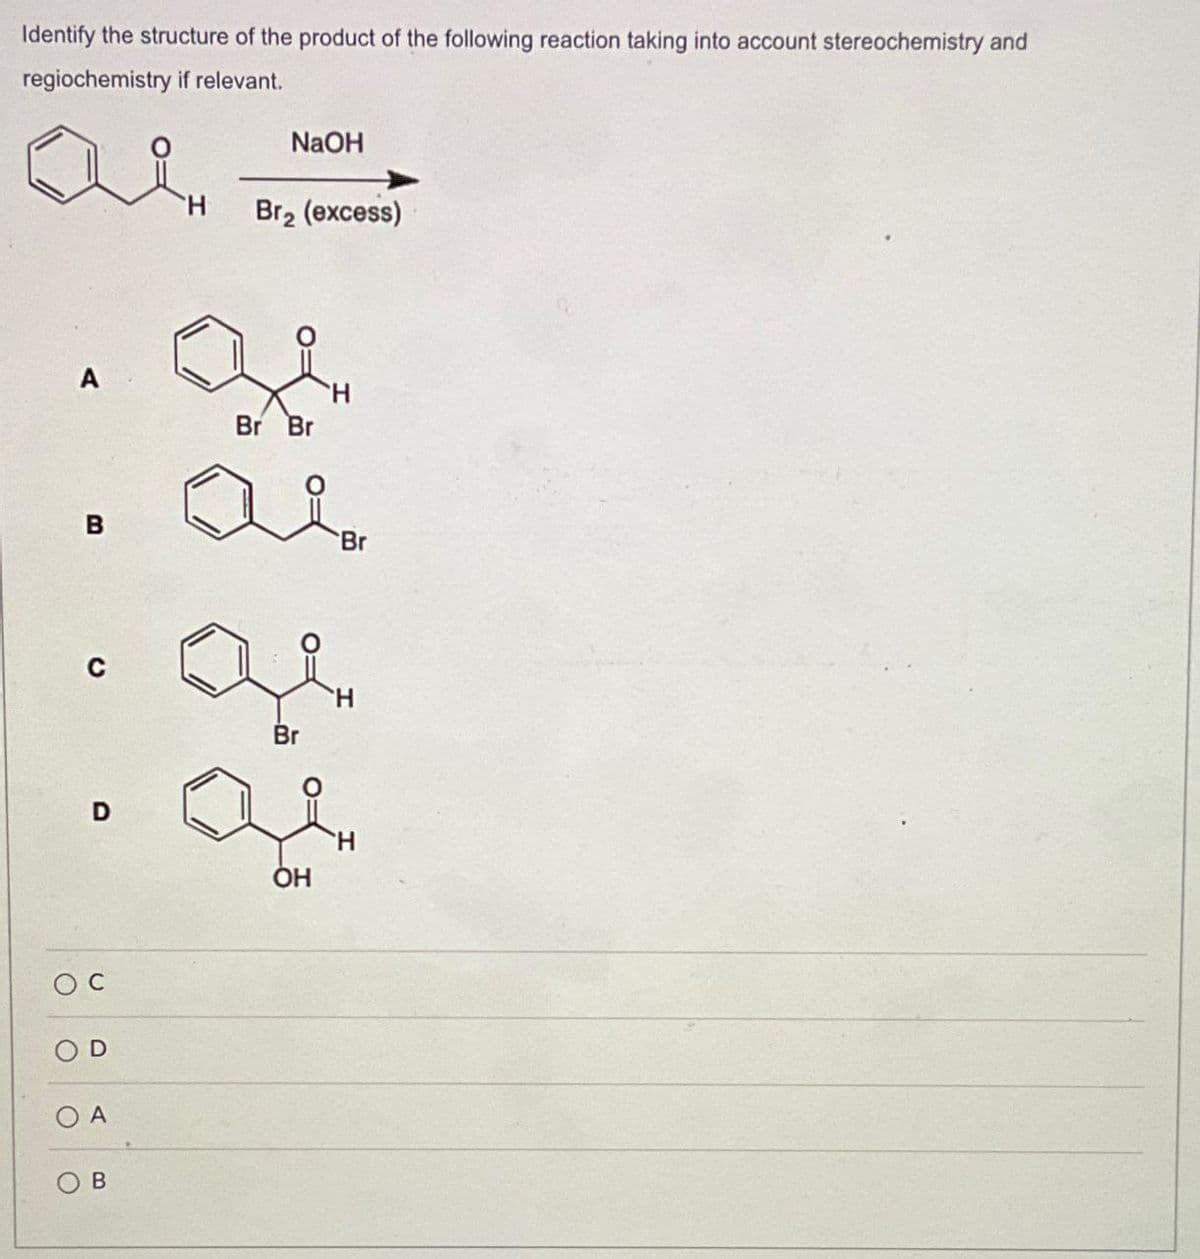 Identify the structure of the product of the following reaction taking into account stereochemistry and
regiochemistry if relevant.
B
D
Oc
O
A
B
NaOH
Br2 (excess)
Br Br
ai
Br
Br
OH
H